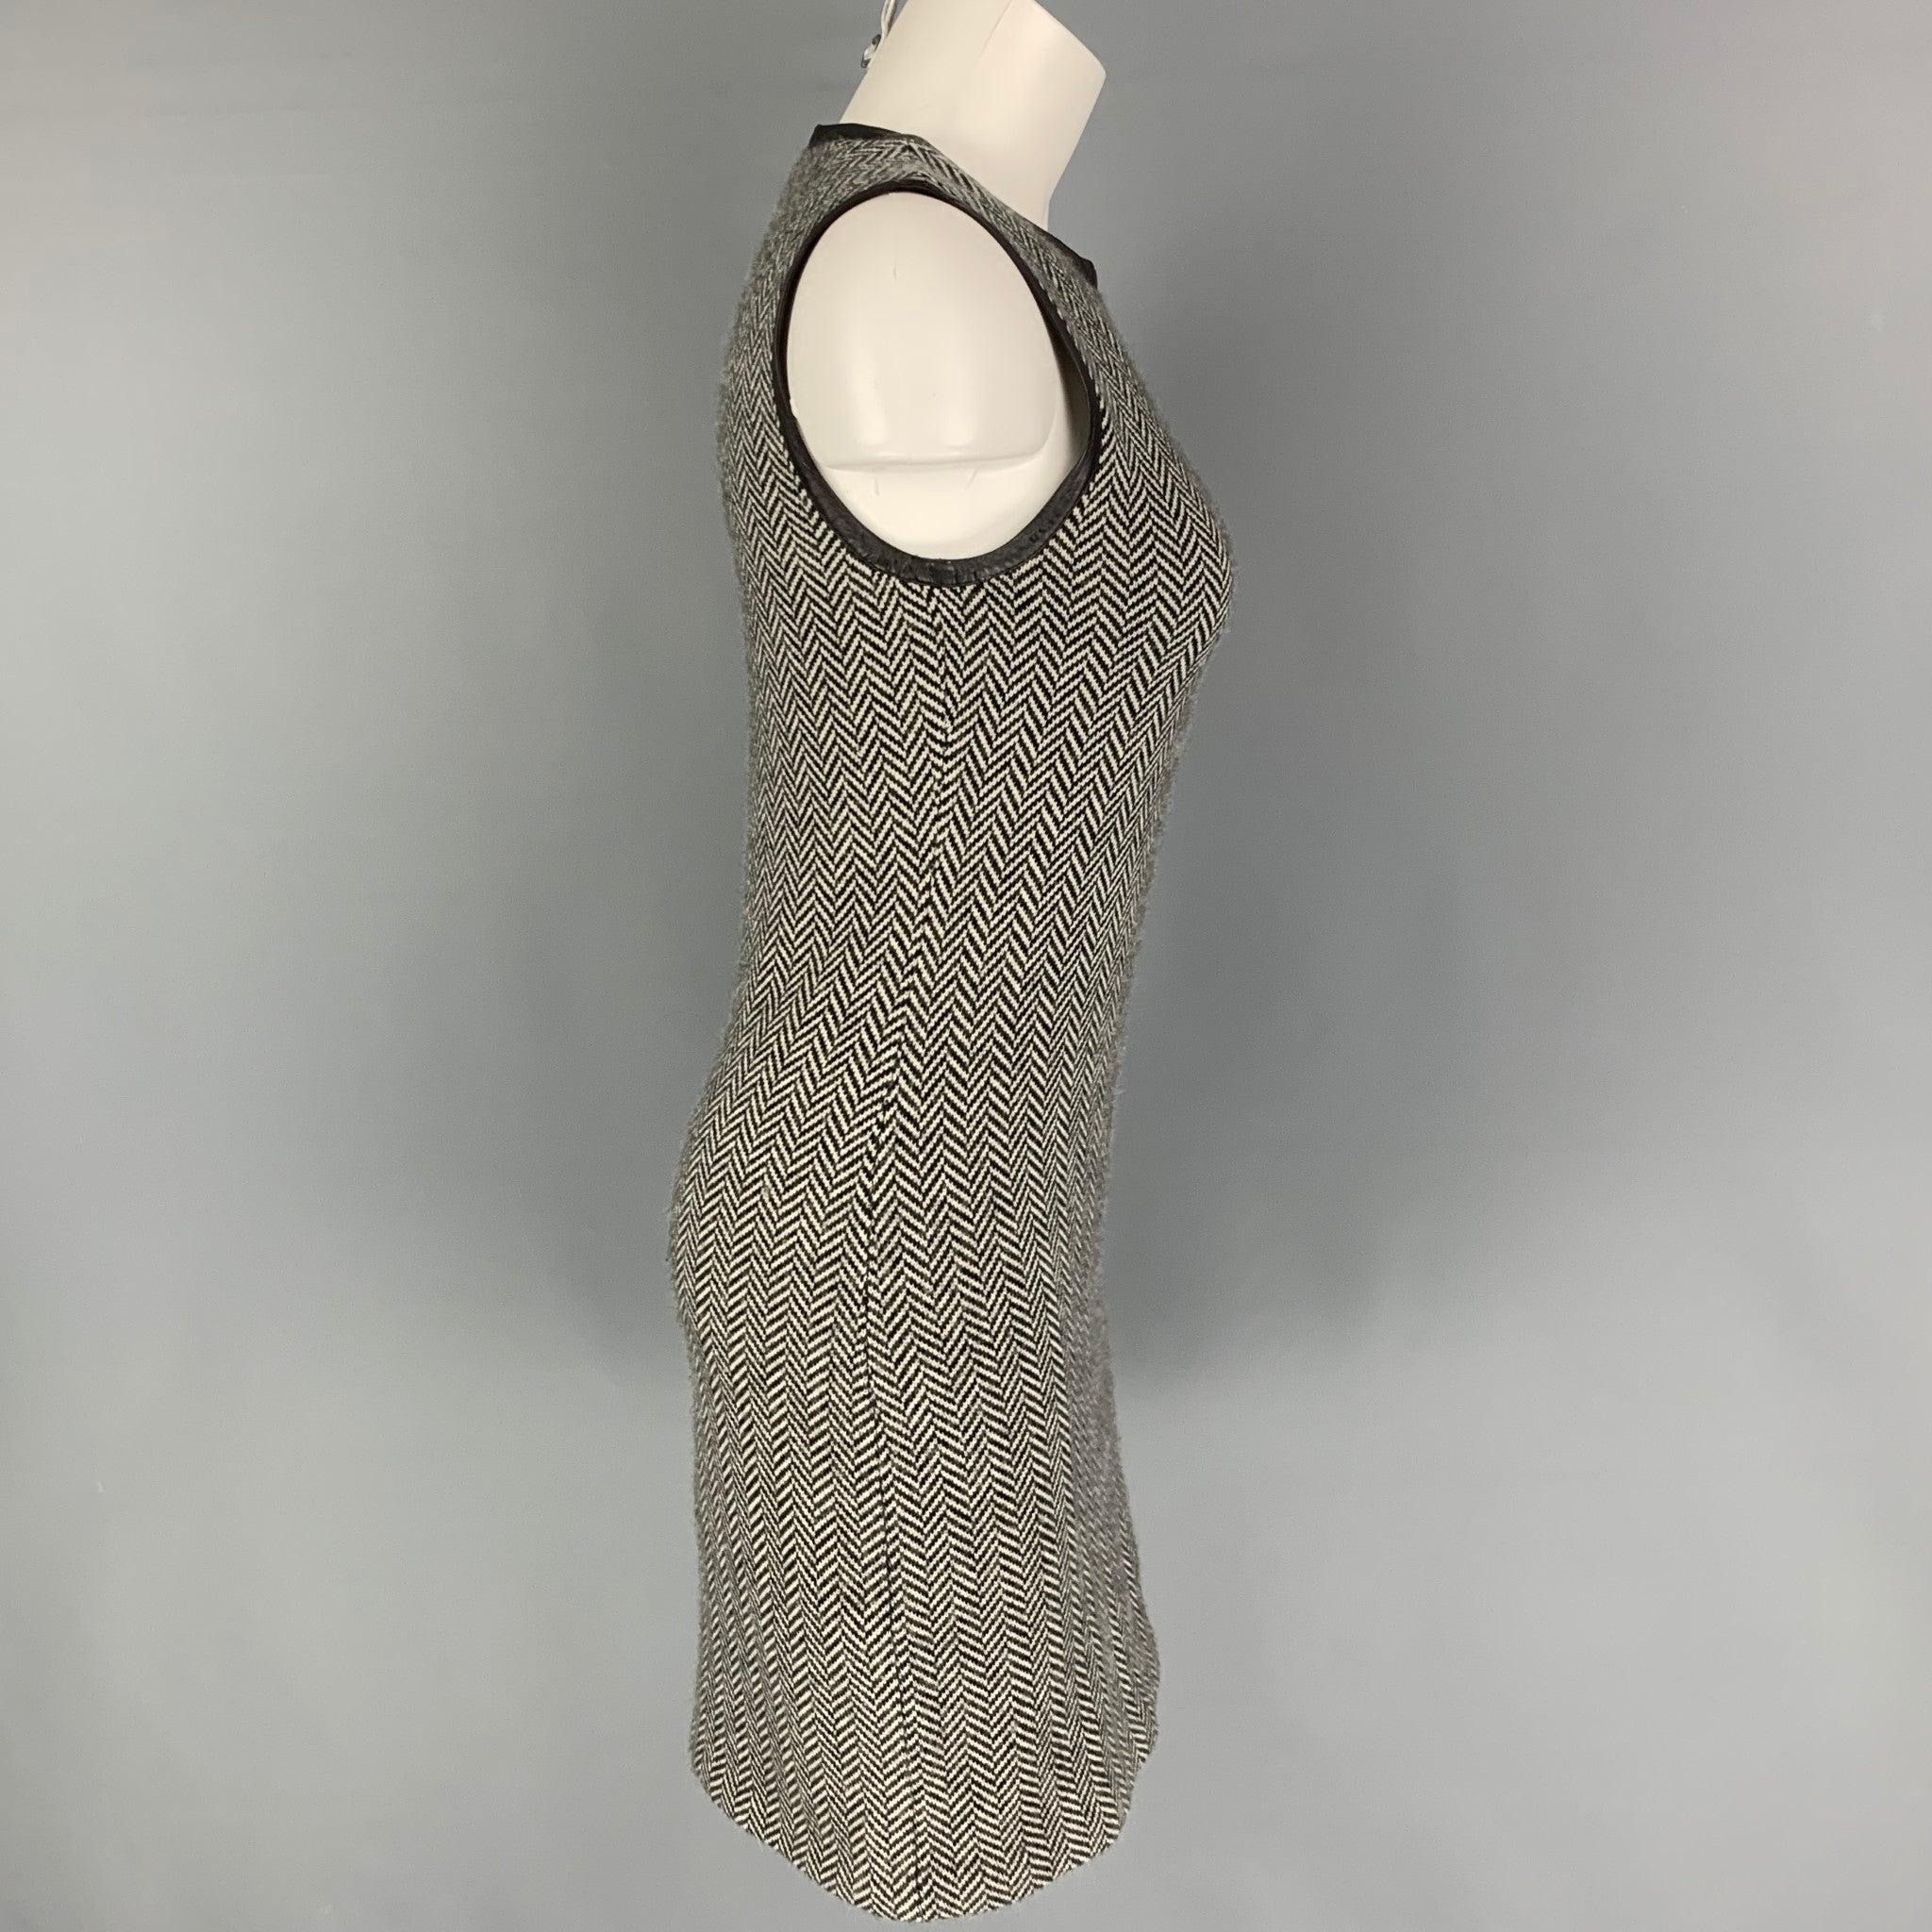 RALPH LAUREN 'Black Label' dress comes in a black & white herringbone cashmere featuring a leather trim, sleeveless, and a back zip up closure.
Very Good
Pre-Owned Condition. 

Marked:   M 

Measurements: 
 
Shoulder: 13.5 inches  Bust: 30 inches